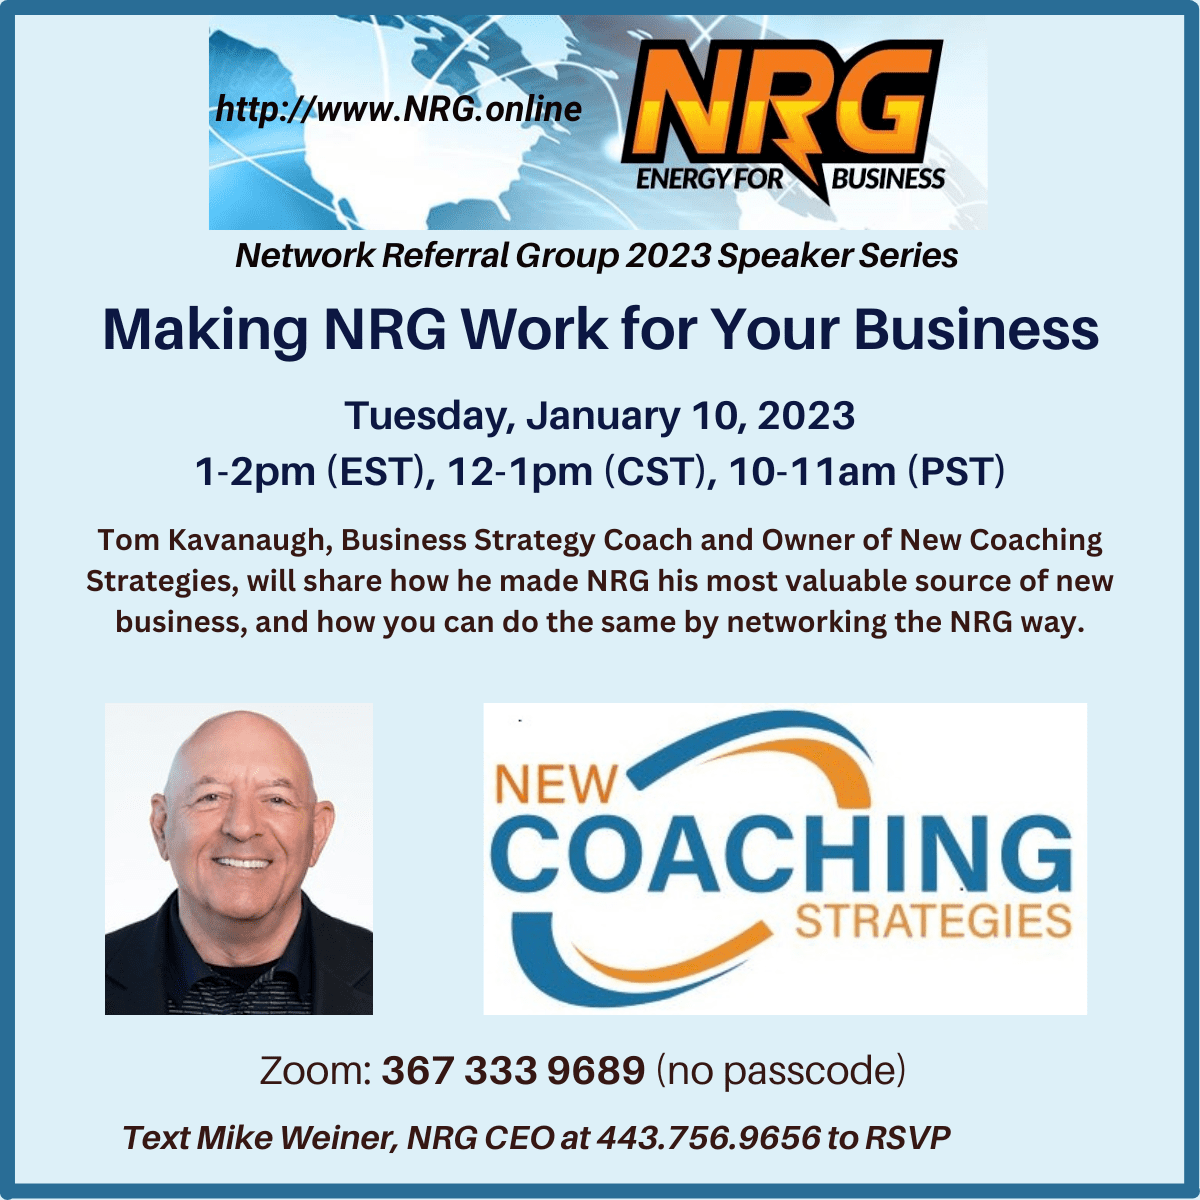 The 2023 NRG Speaker Series – kicks off on Tuesday, January 10, 1PM EST / 12PM CST / 10AM PST. Business Coach and Northern California NRG member, Tom Kavanaugh will talk about “Making NRG Work for Your Business”. To be held on Mike’s Zoom: 367-333-9689, no passcode. Text Mike Weiner at 443.756.9656 to RSVP.